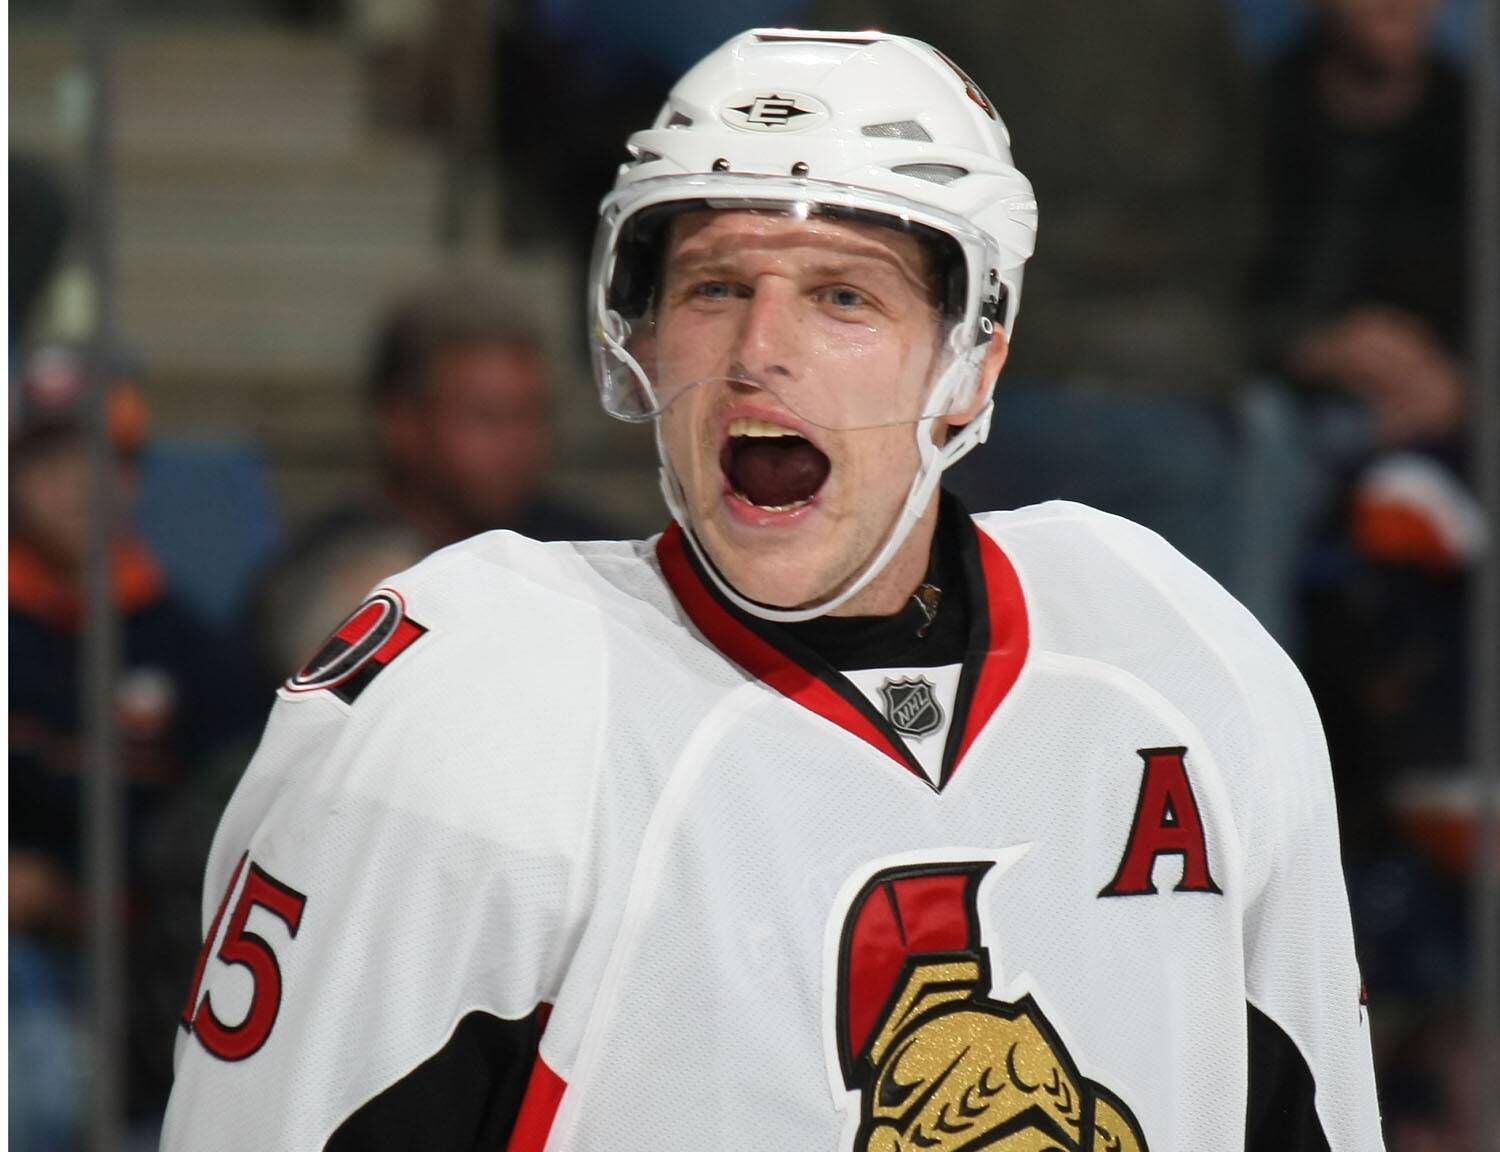 Heatley unhappy with 'diminished' role on Senators